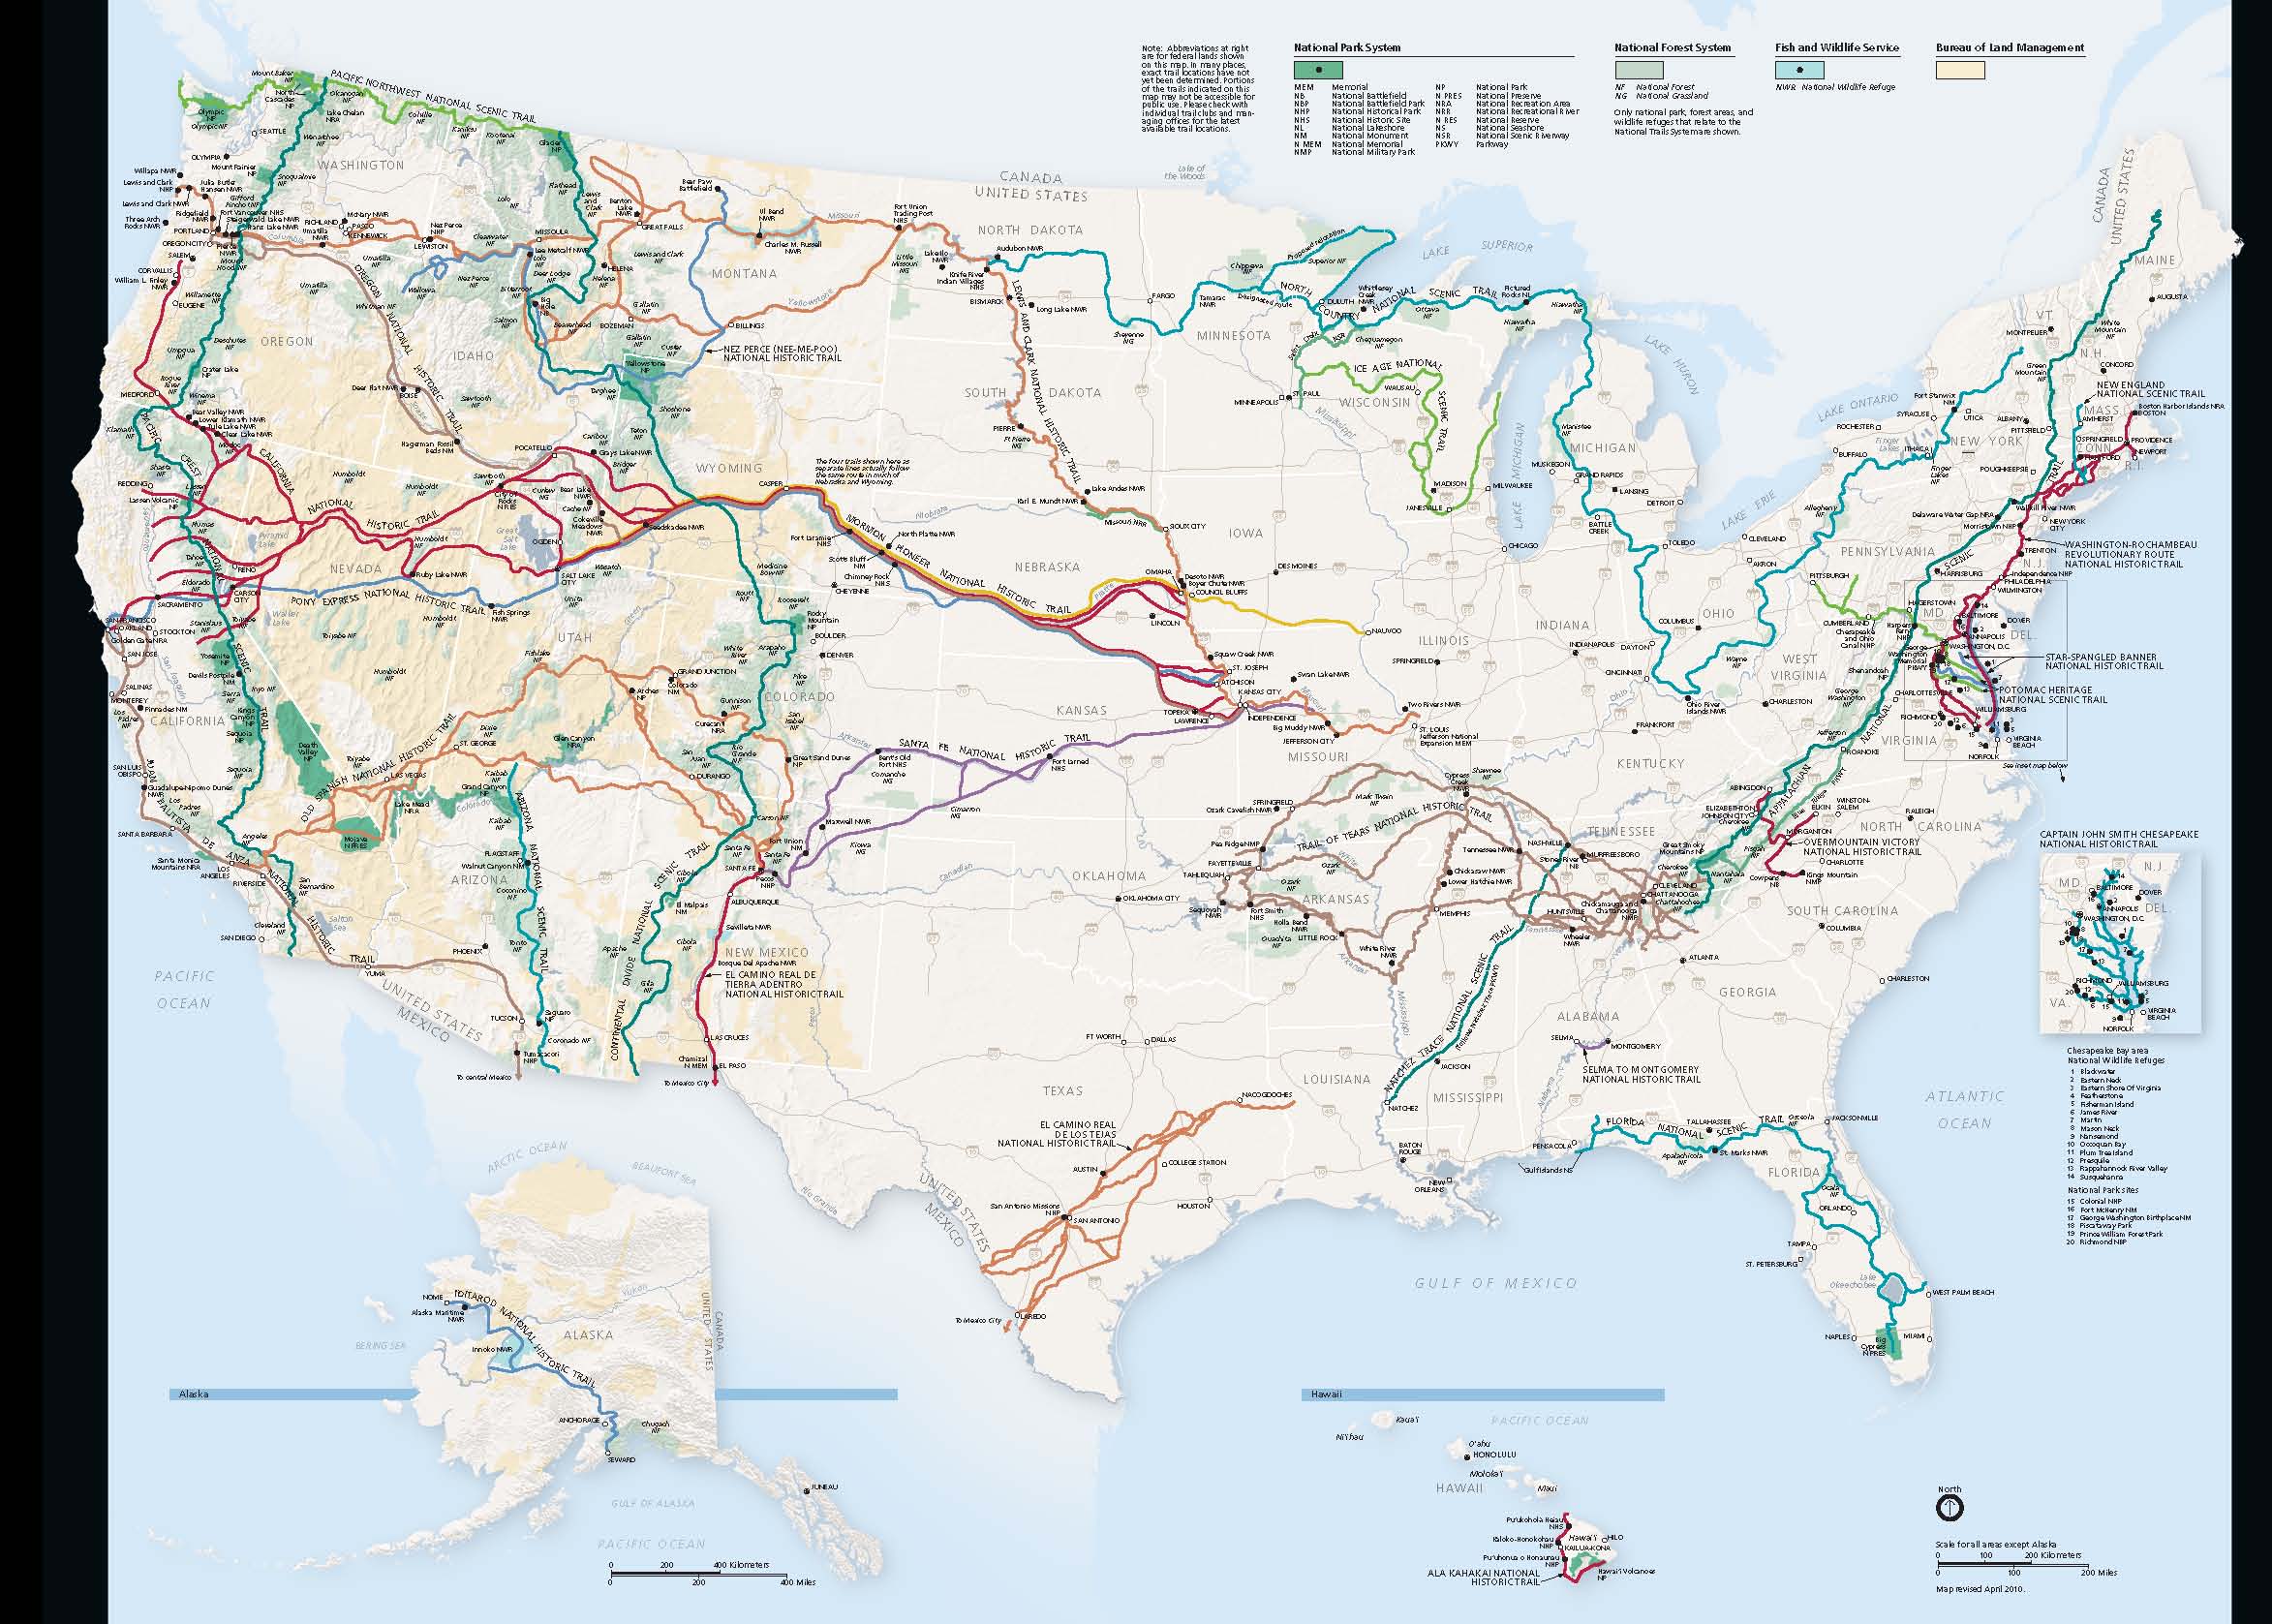 The National Trails System as it exists today.